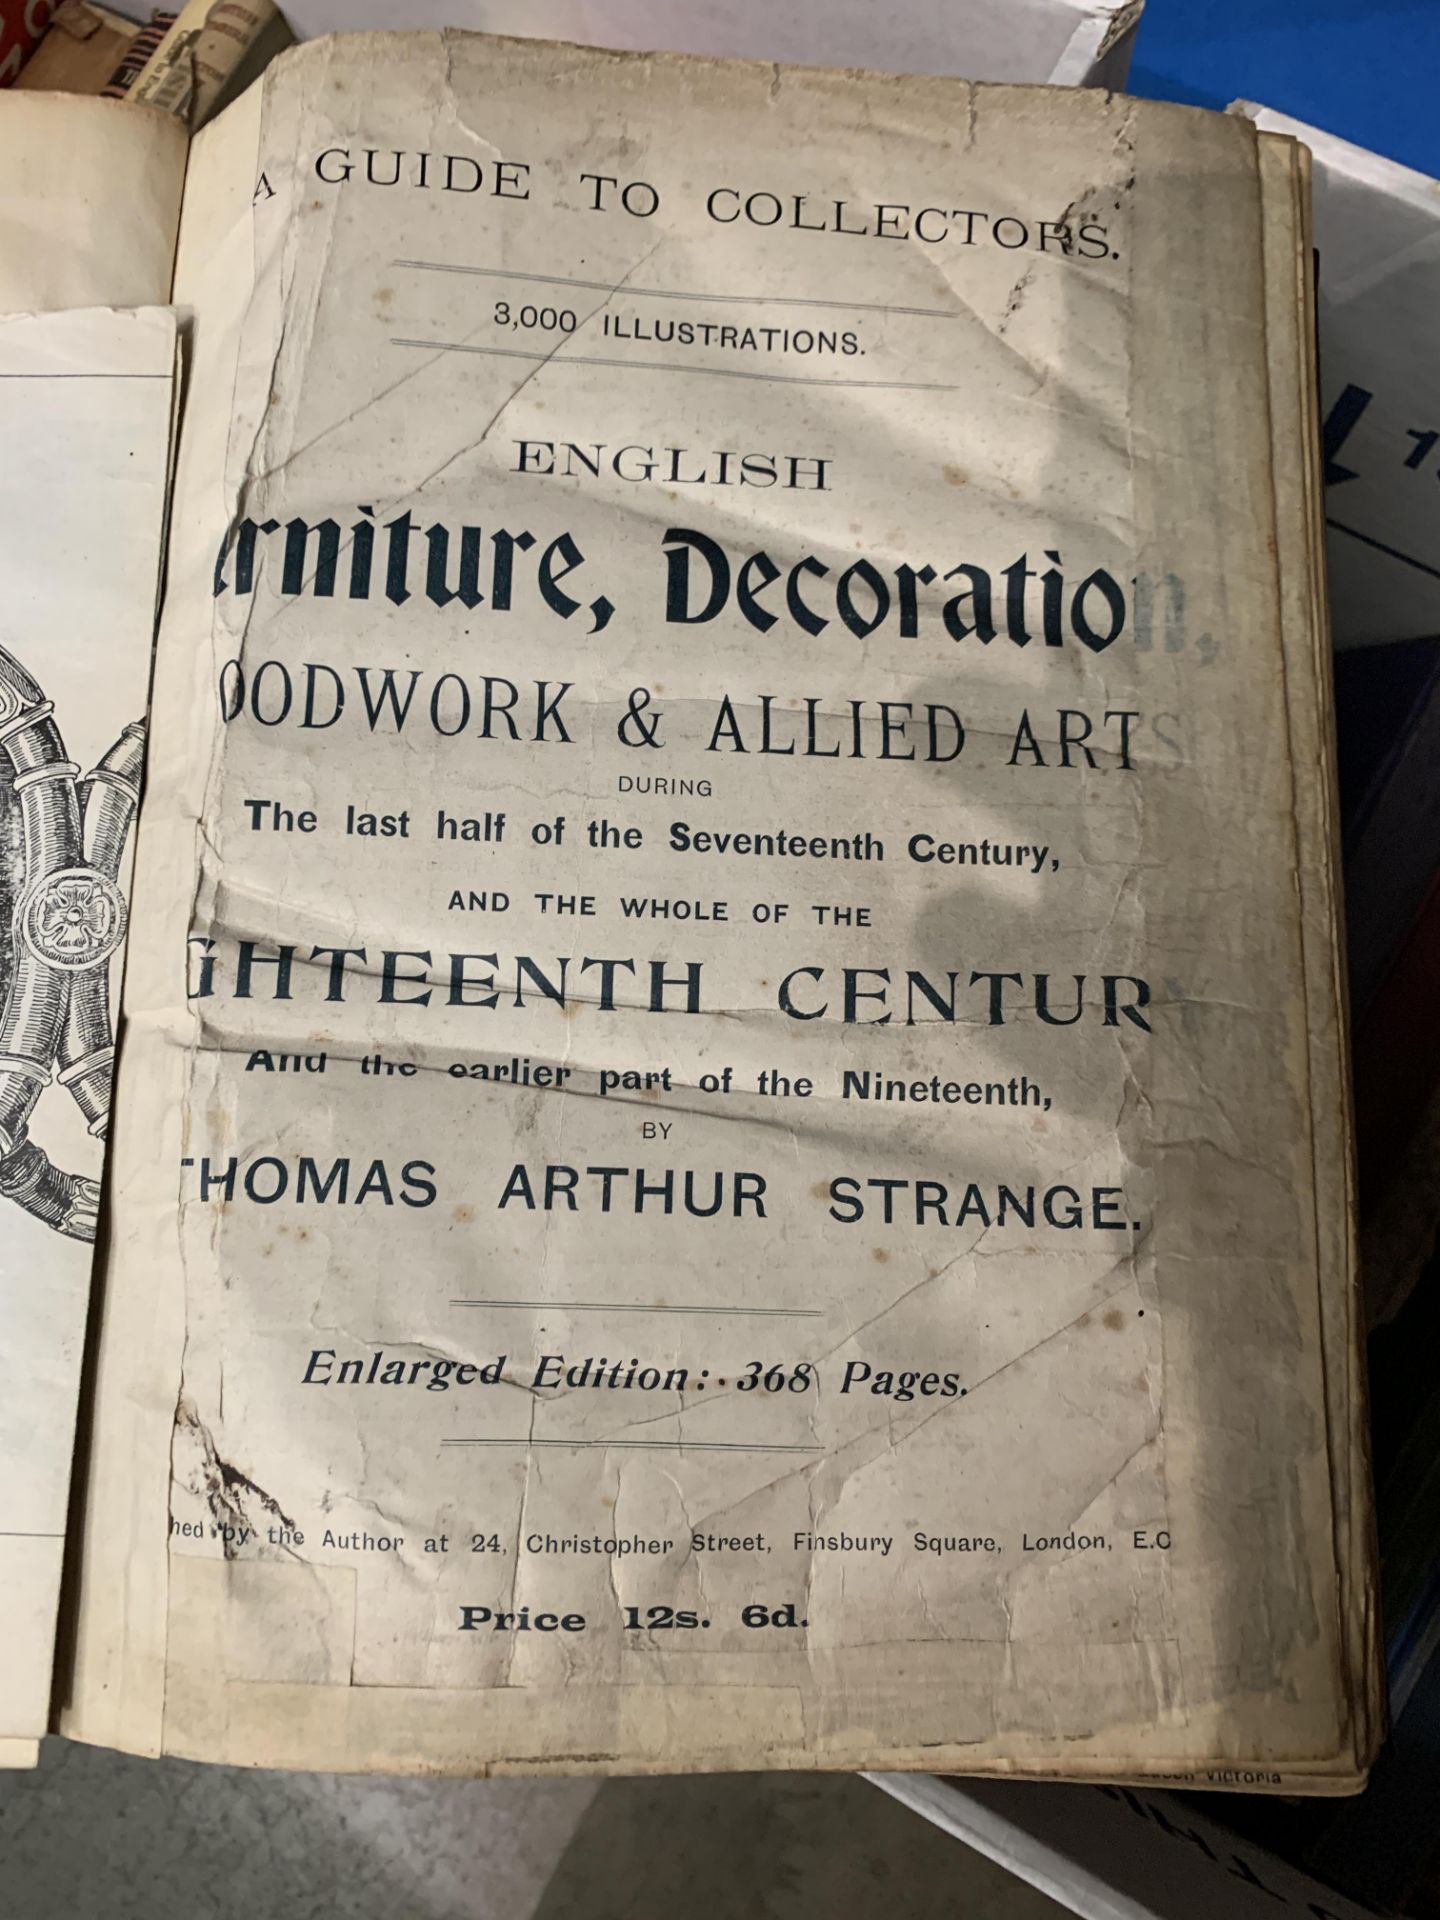 Contents to three boxes, various books on furniture, woodworking and metalwork, - Image 9 of 13